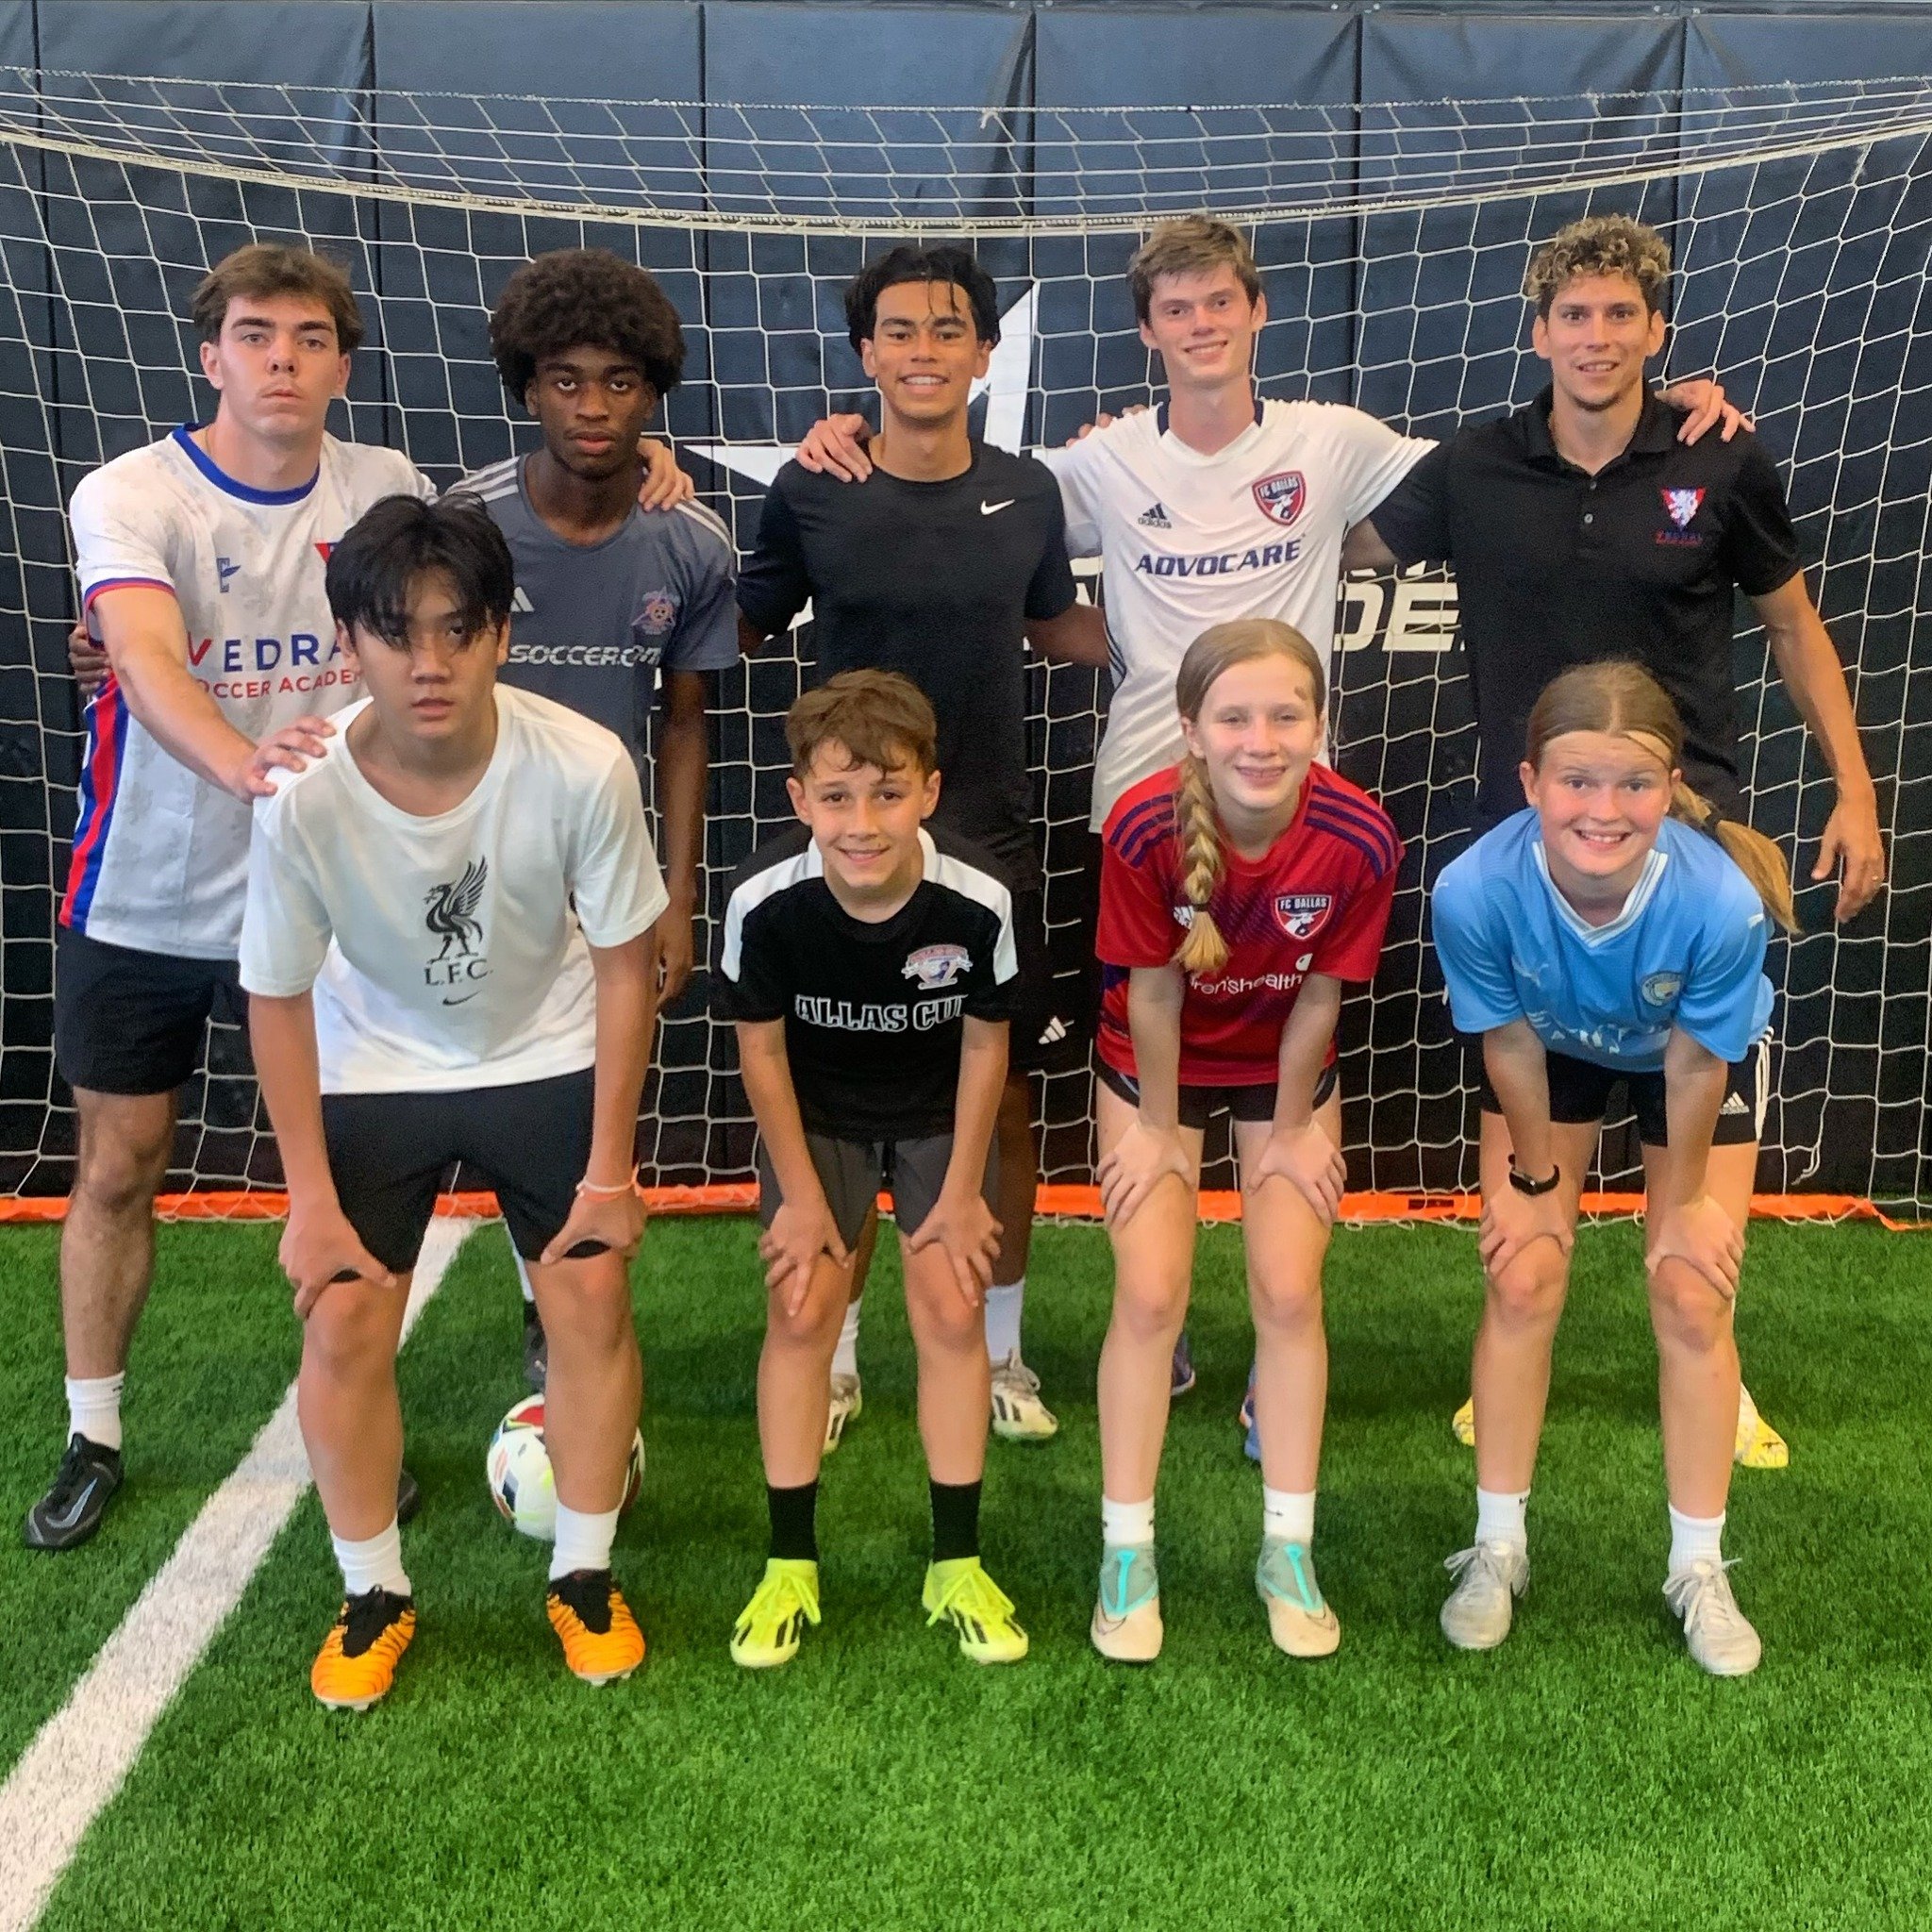 Top training, top facility, top players. Sign up with Vedral Soccer Academy for training next week in Richardson or Frisco. Also be on the lookout for our upcoming camps!

www.VedralSoccer.com

#vedralsocceracademy 
#friscotx #richardsontx #planotx #